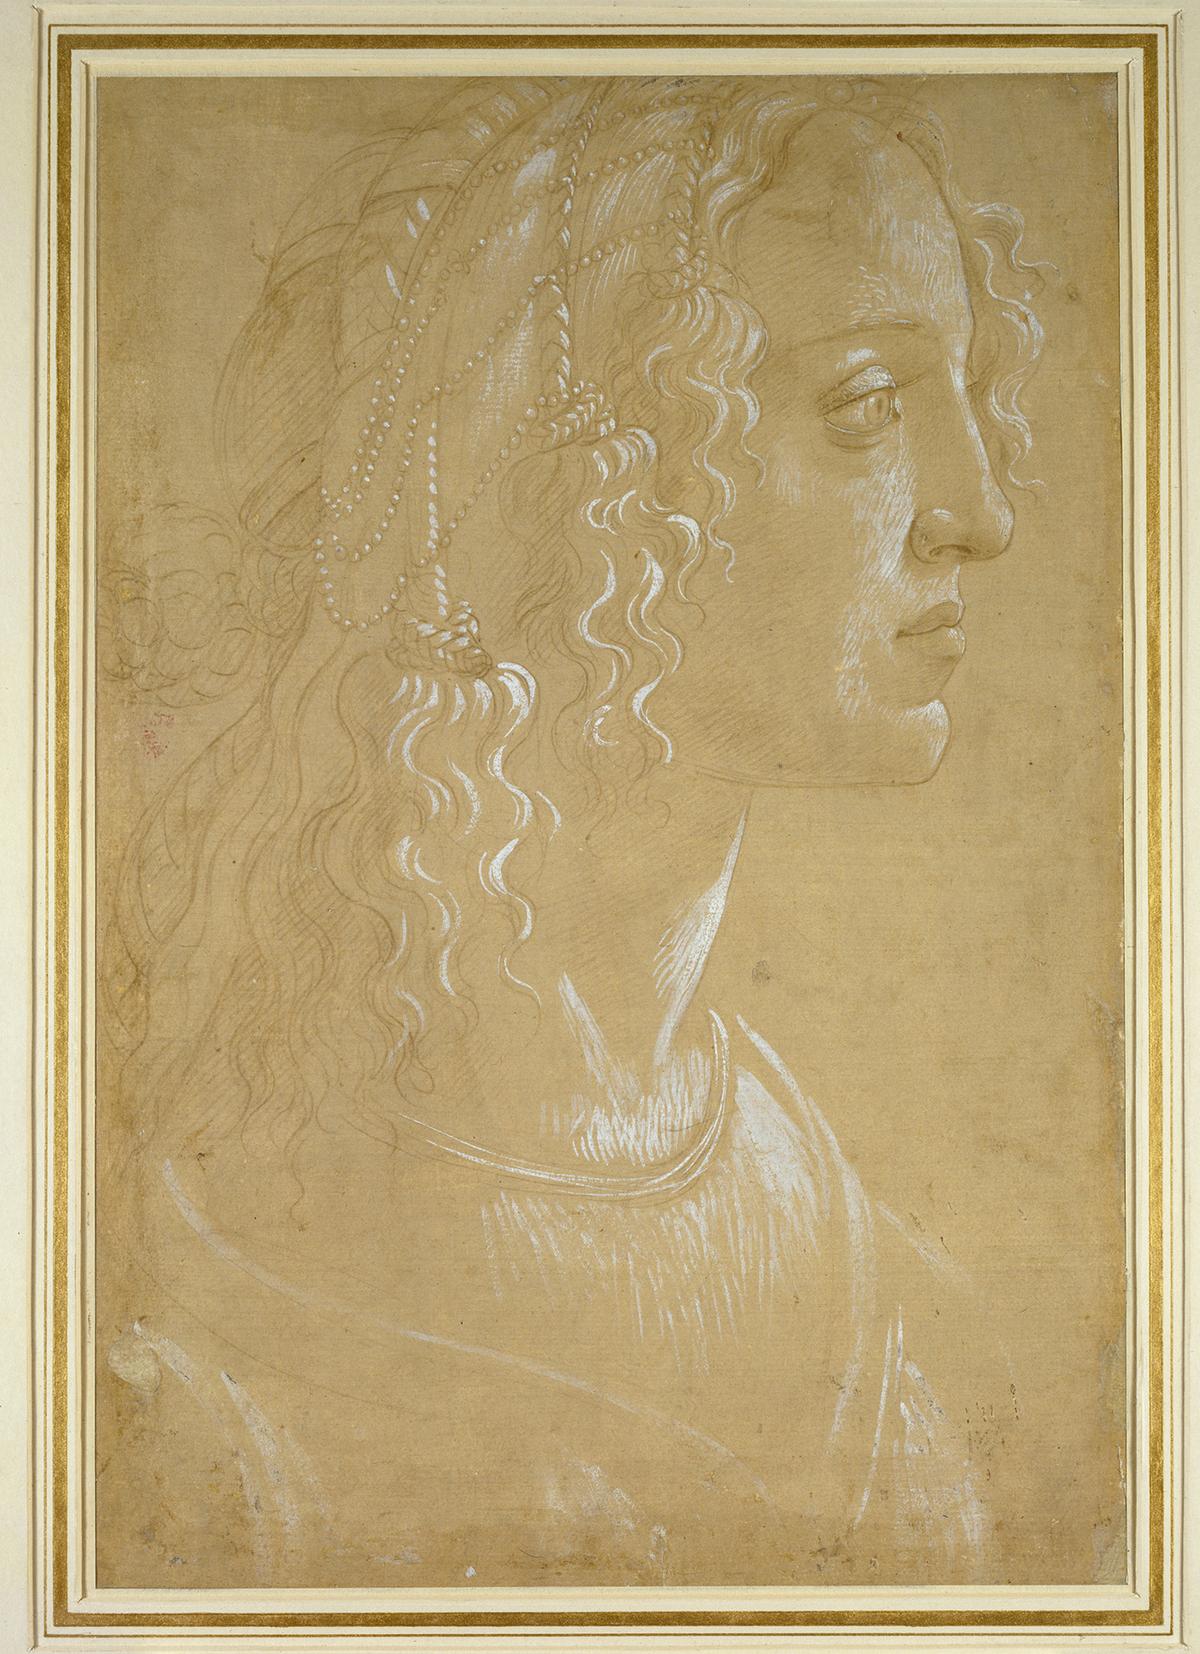 "Study of the head of a woman in profile,” circa 1485, by Sandro Botticelli. Metalpoint, white gouache on Light brown prepared paper (recto), black chalk, pen and brown ink, brown wash, white gouache (verso); 13 7/16 x 9 1/16 in. The Ashmolean Museum, University of Oxford. (Courtesy of Legion of Honor)